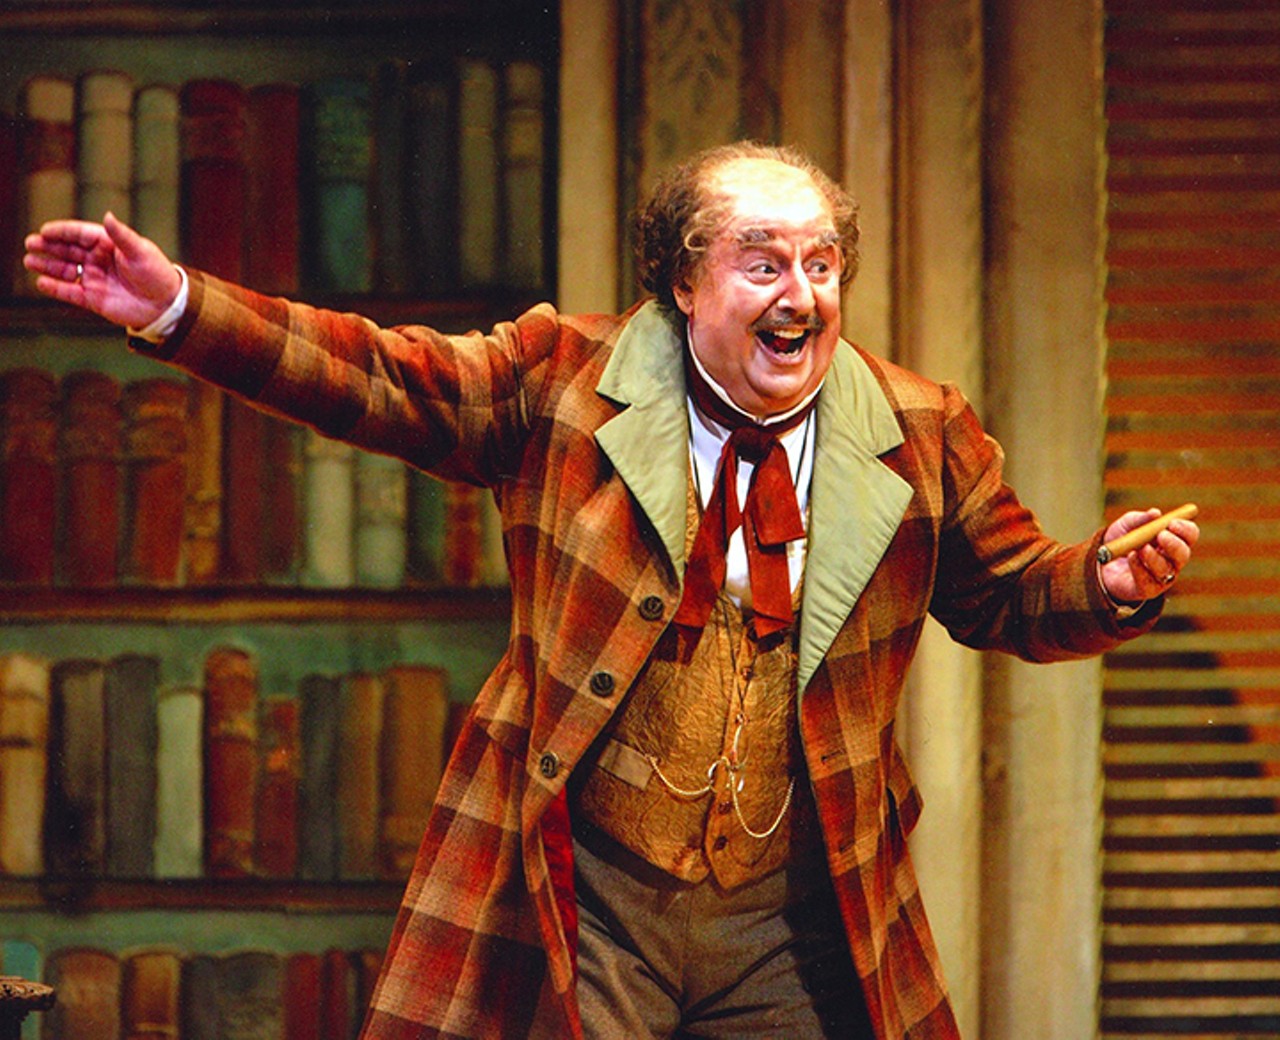 Friday and Sunday, Nov. 18 and 20Opera Orlando: Don Pasquale at the Dr. Phillips Center for the Performing Arts